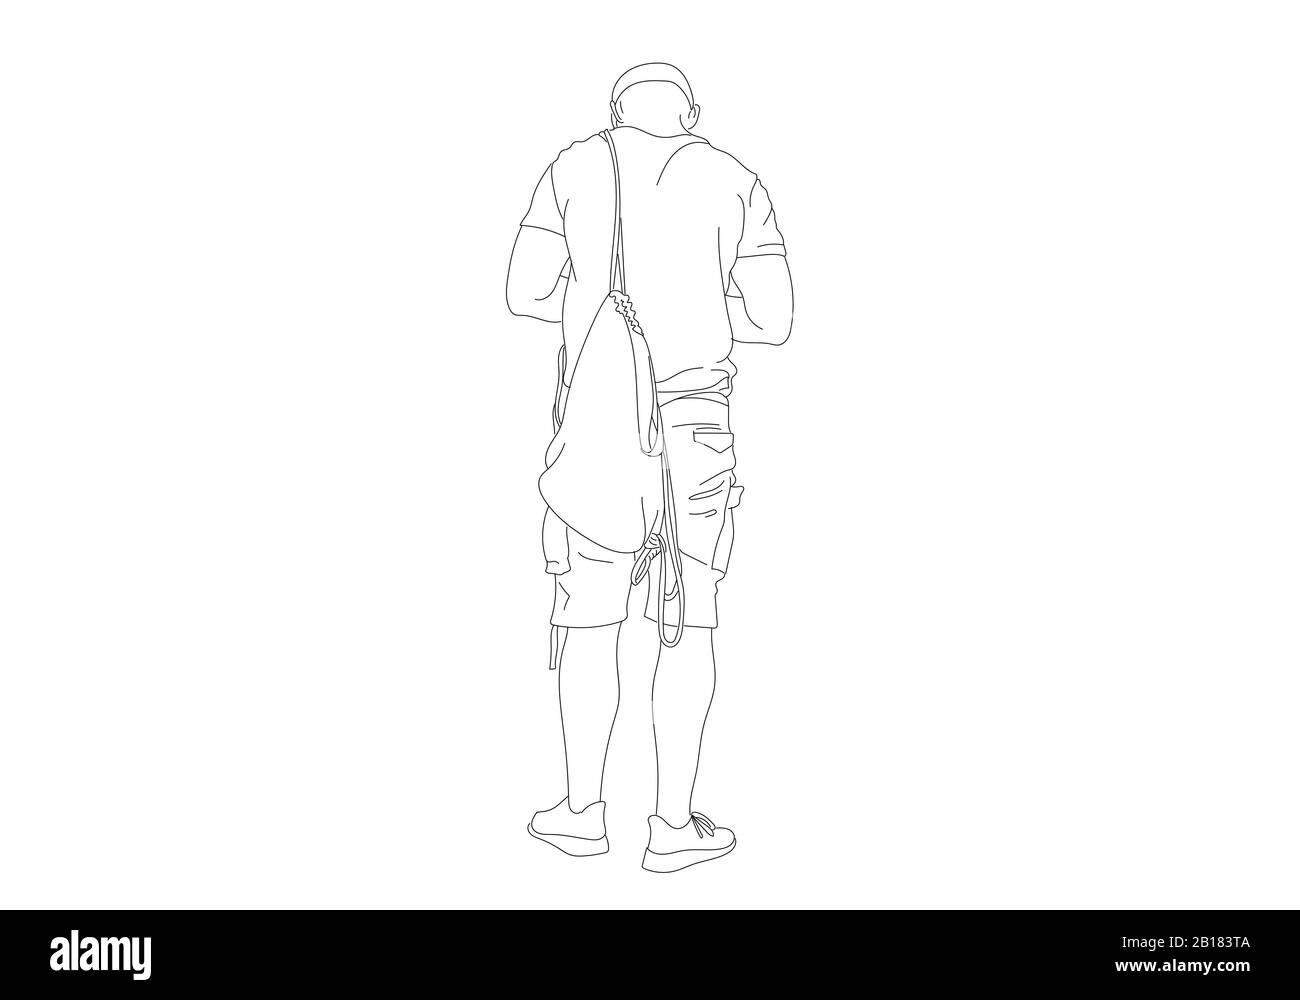 Sketch of standing man with shopping bag Hand drawn illustration  Human  figure sketches Figure sketching Human sketch